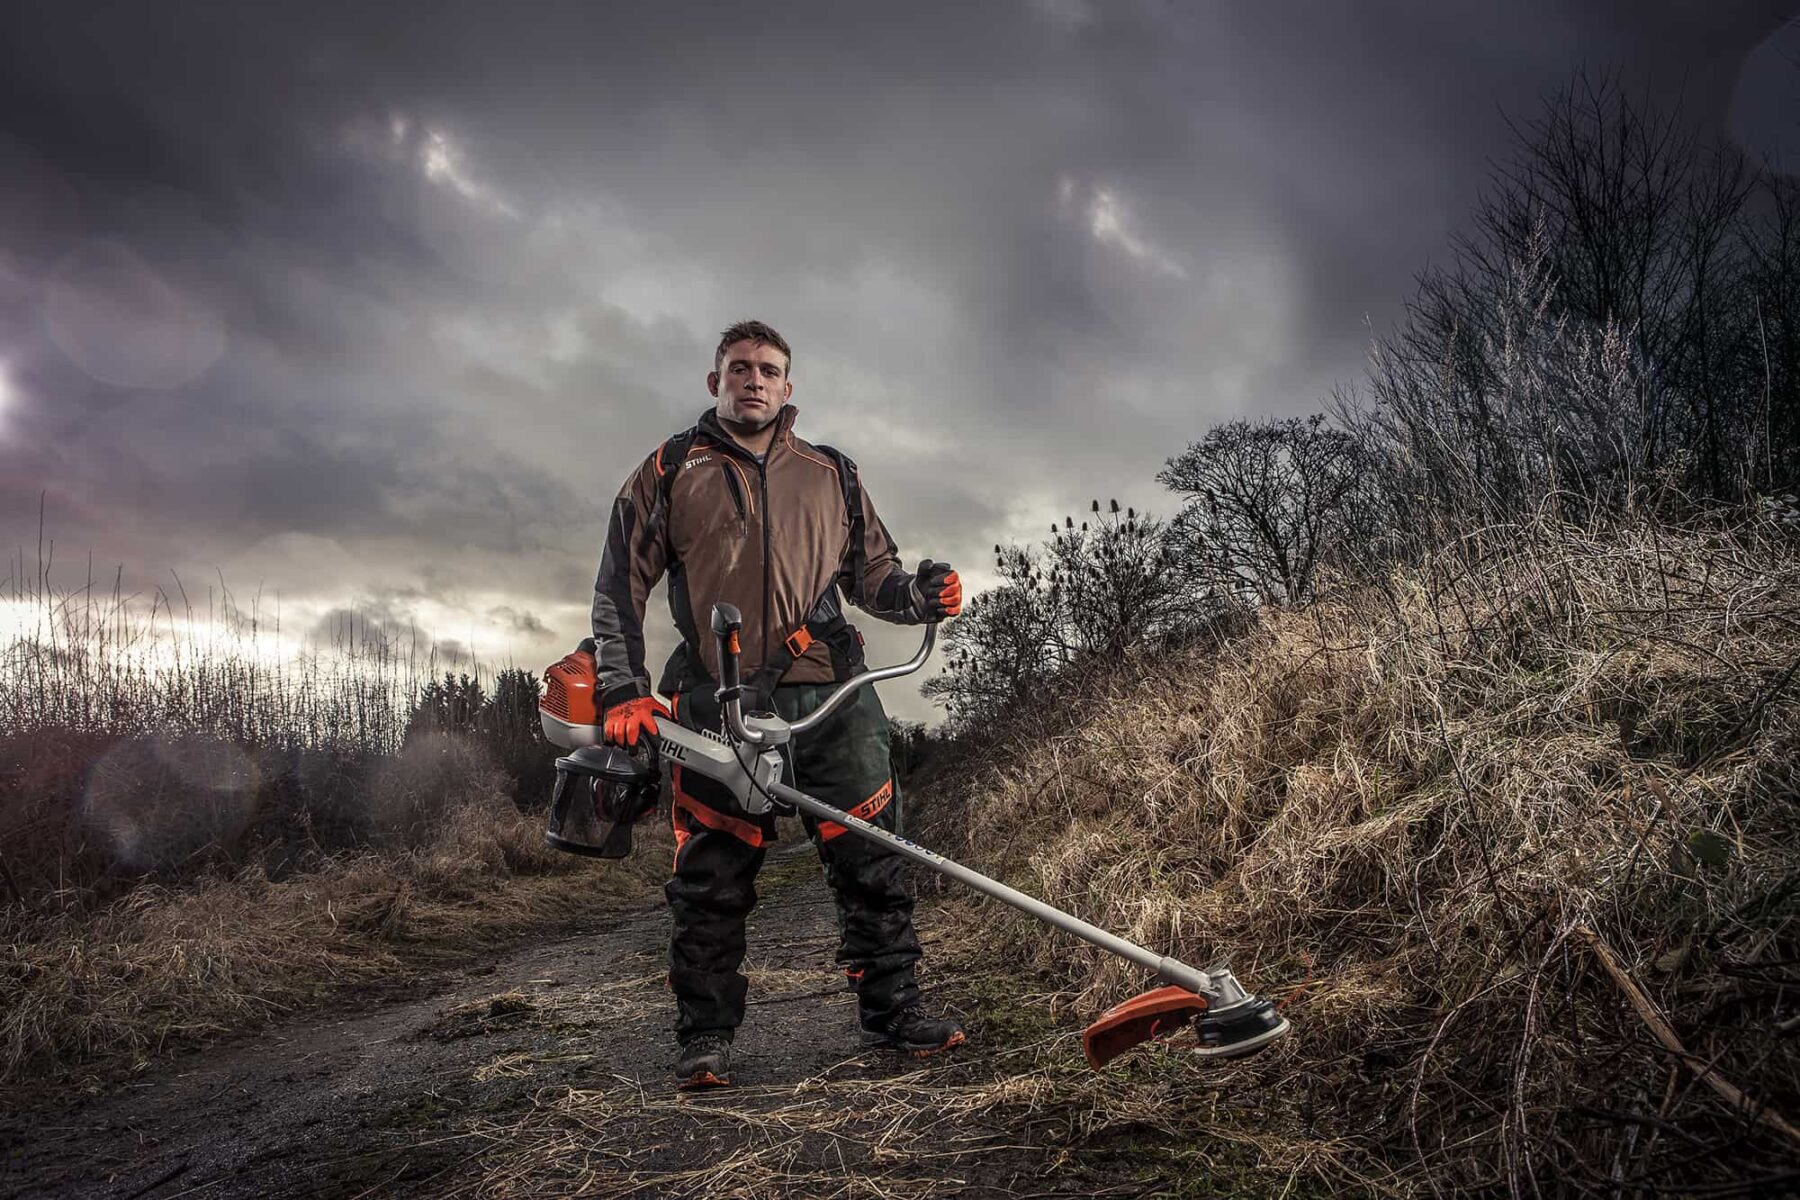 Tom Youngs leicester Rugby Hooker using Stihl Brushcutter tool on location, photography by ross vincent